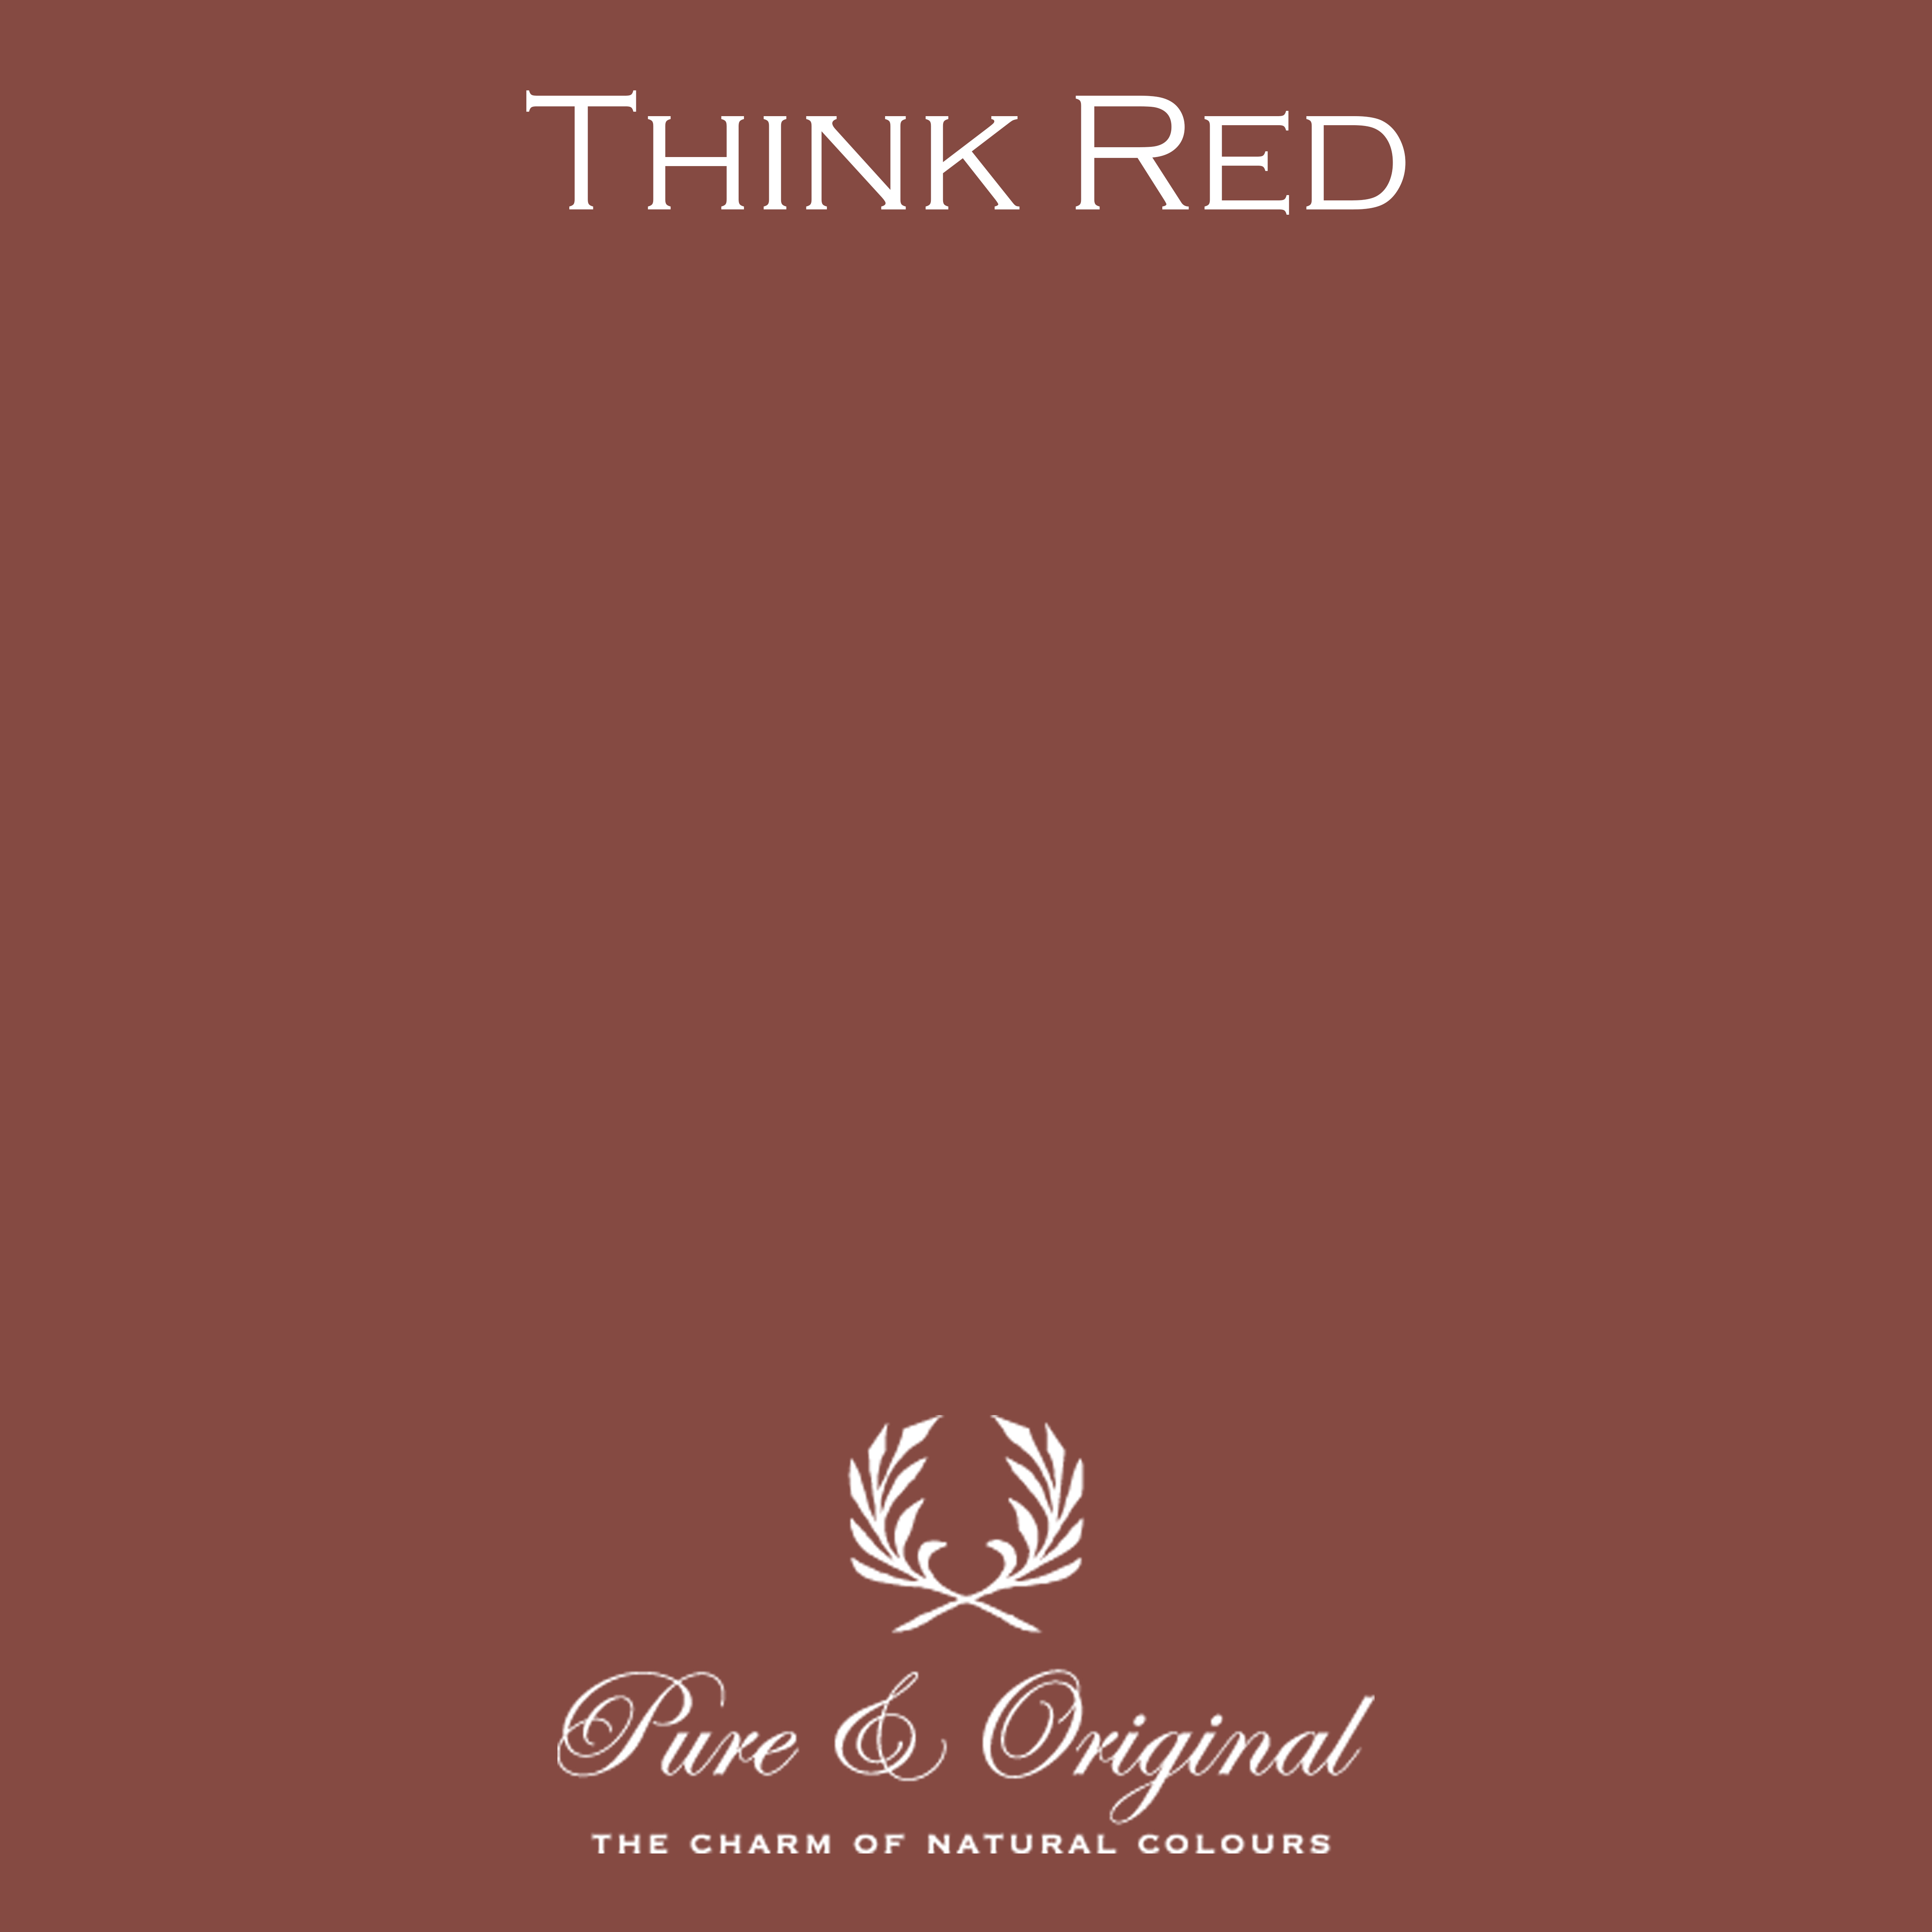 pure&orignal-traditional-paint-oilbased-lak-think-red-1